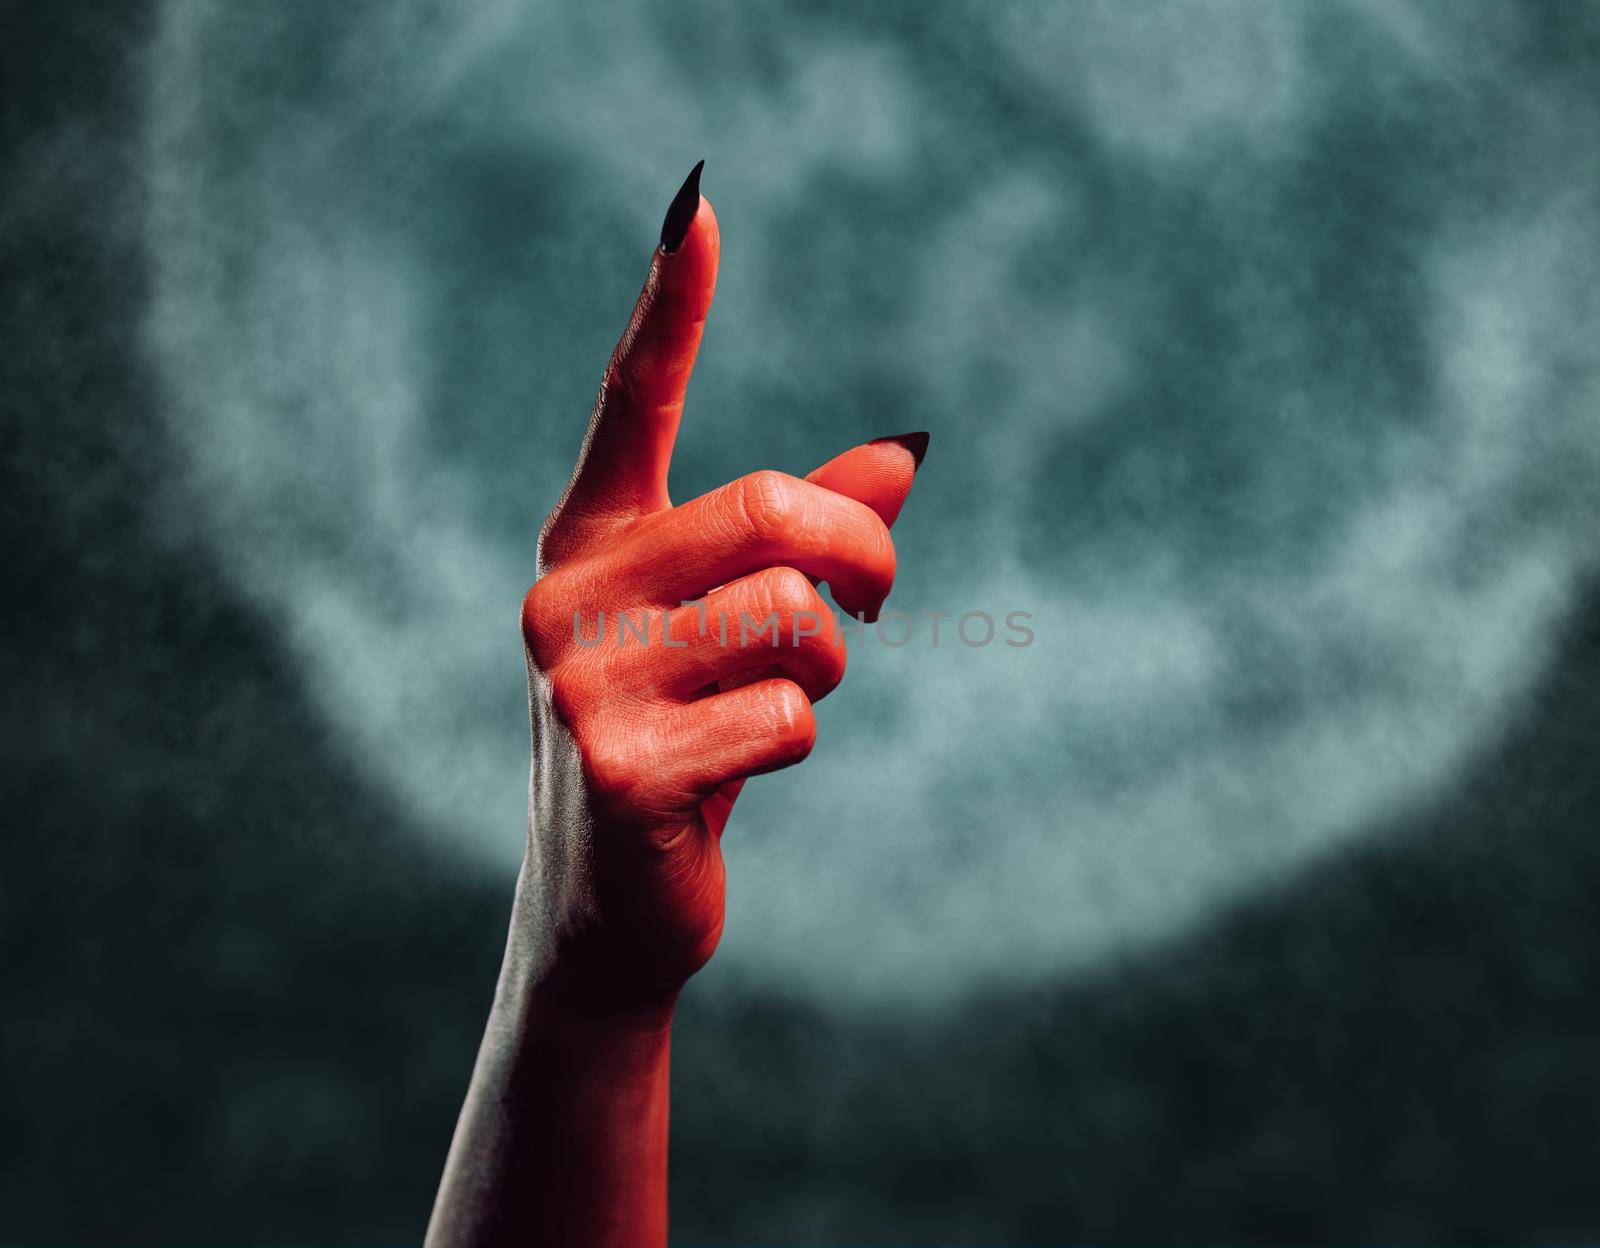 Red demon hand with gesture pointing upward on background of full moon, space for text. Halloween or horror theme